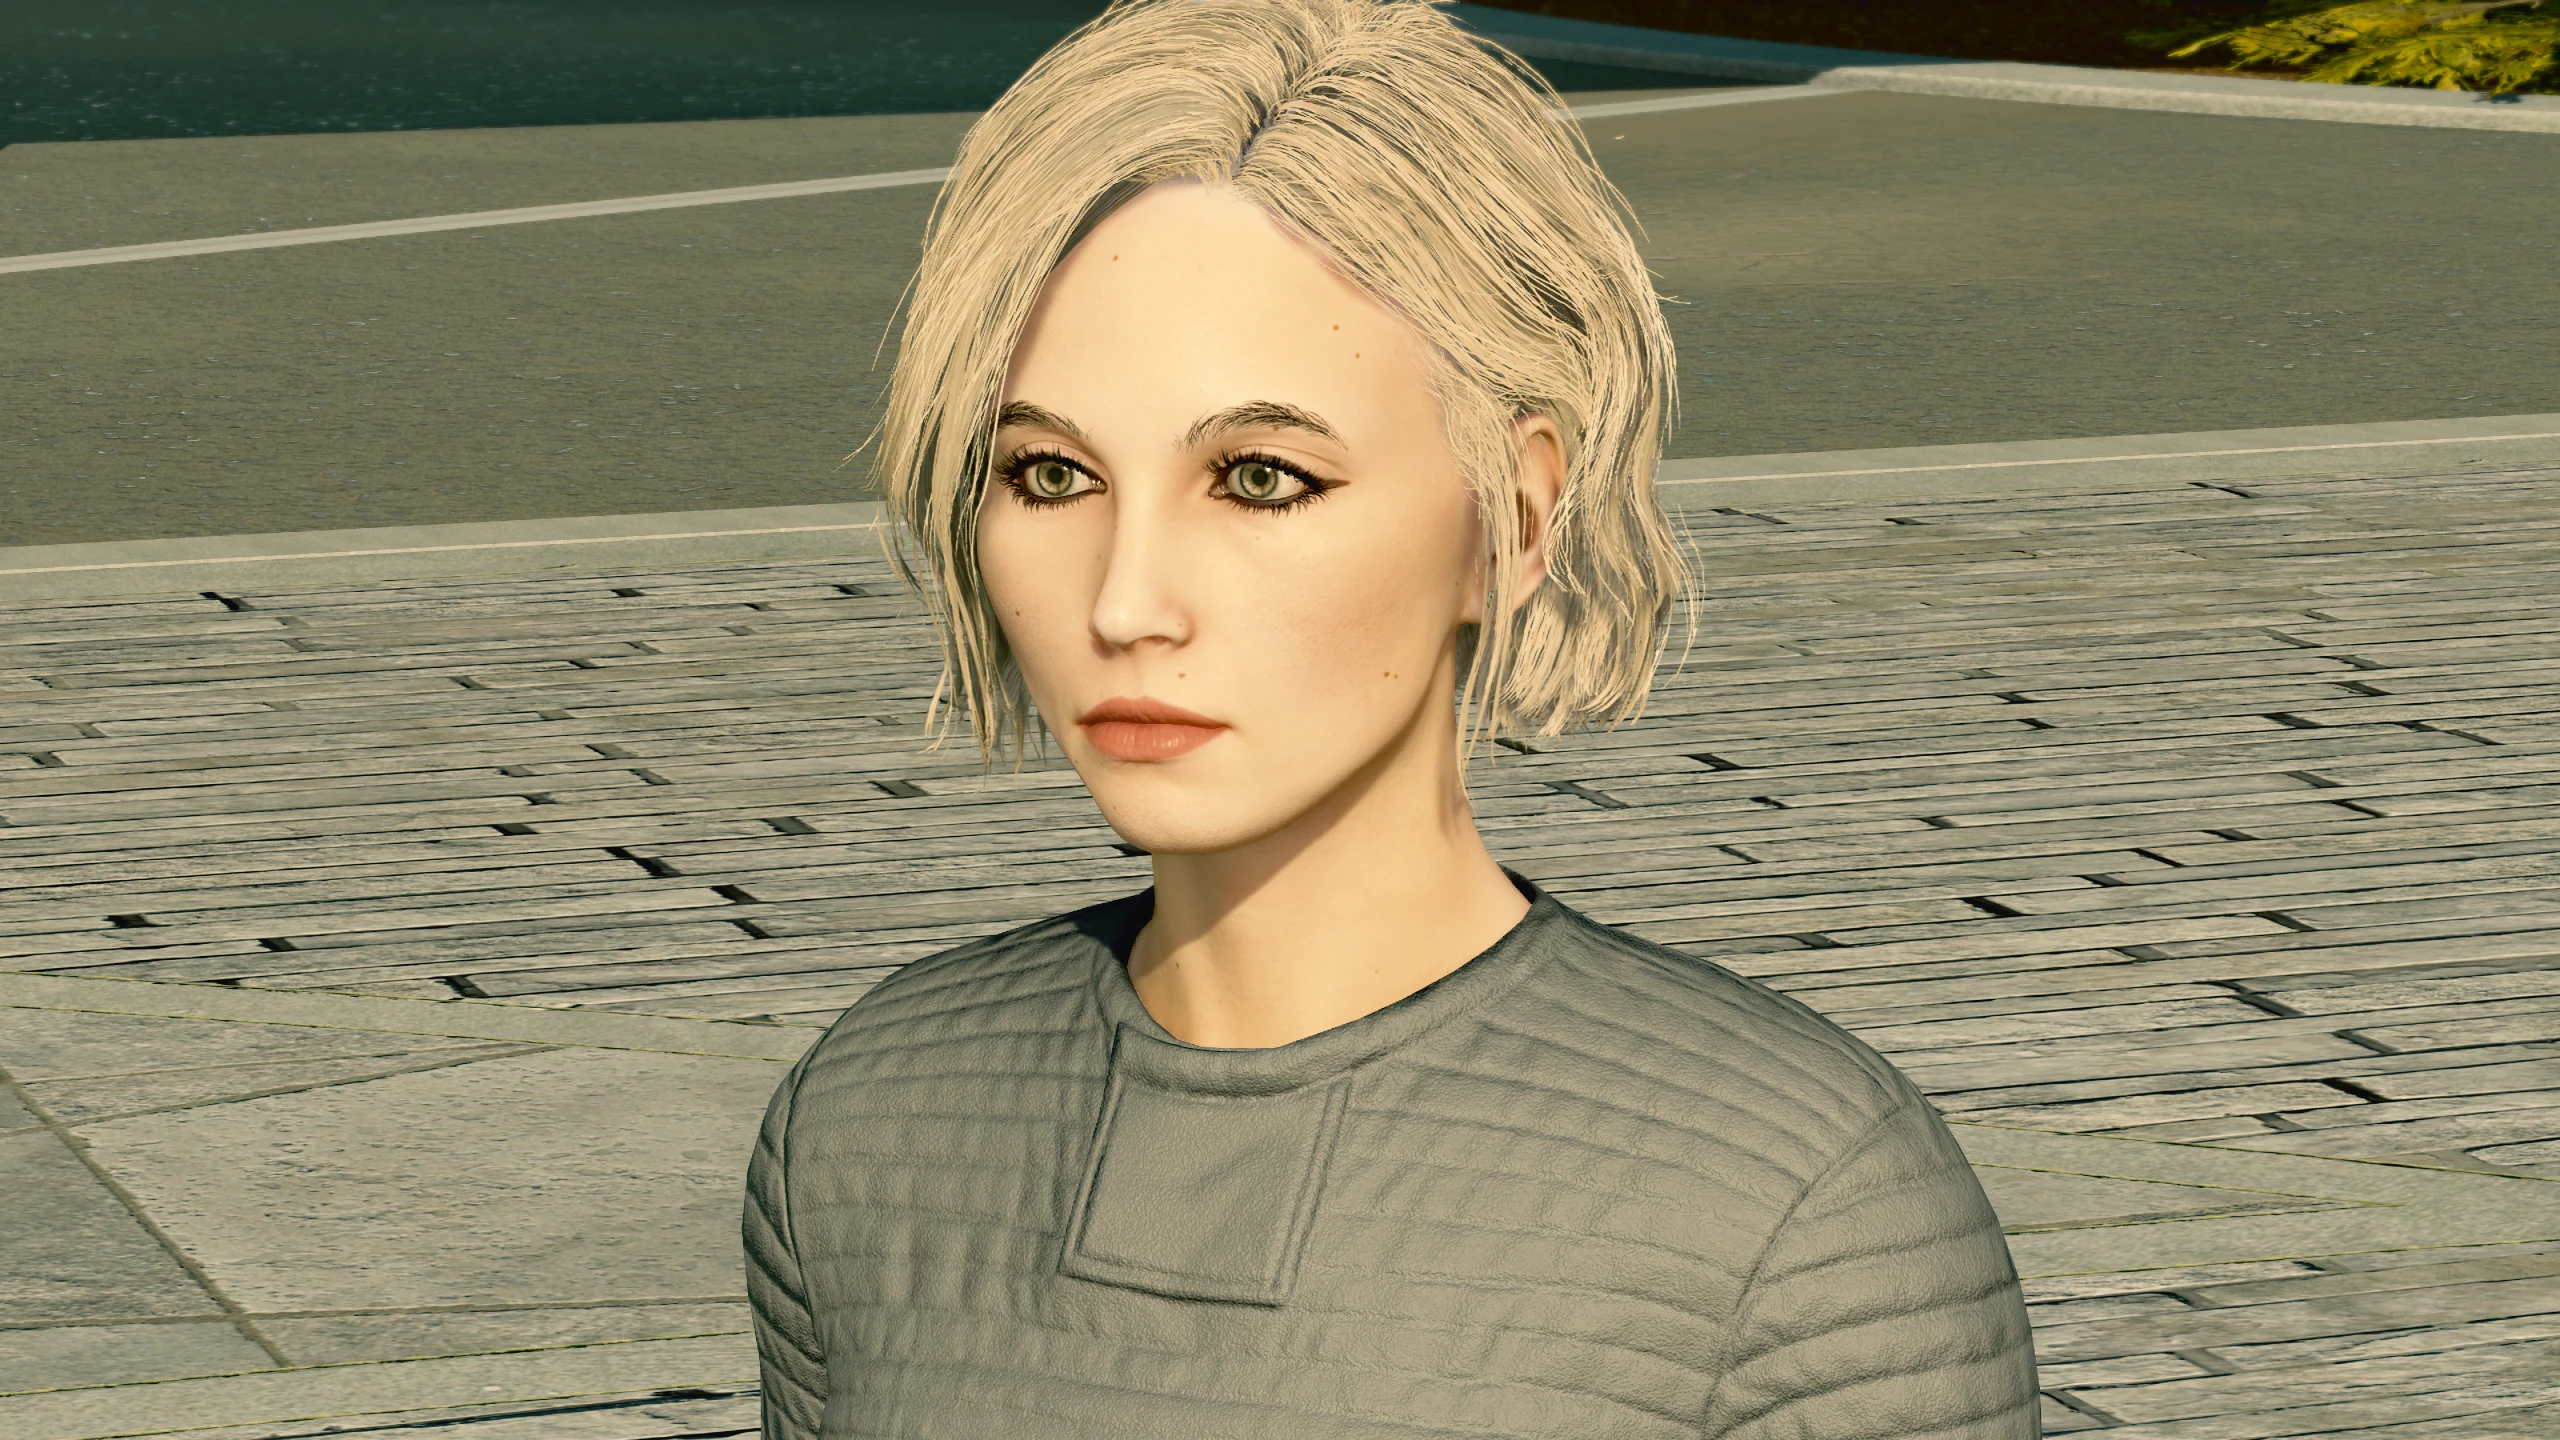 spent too long in character creator at Starfield Nexus - Mods and Community